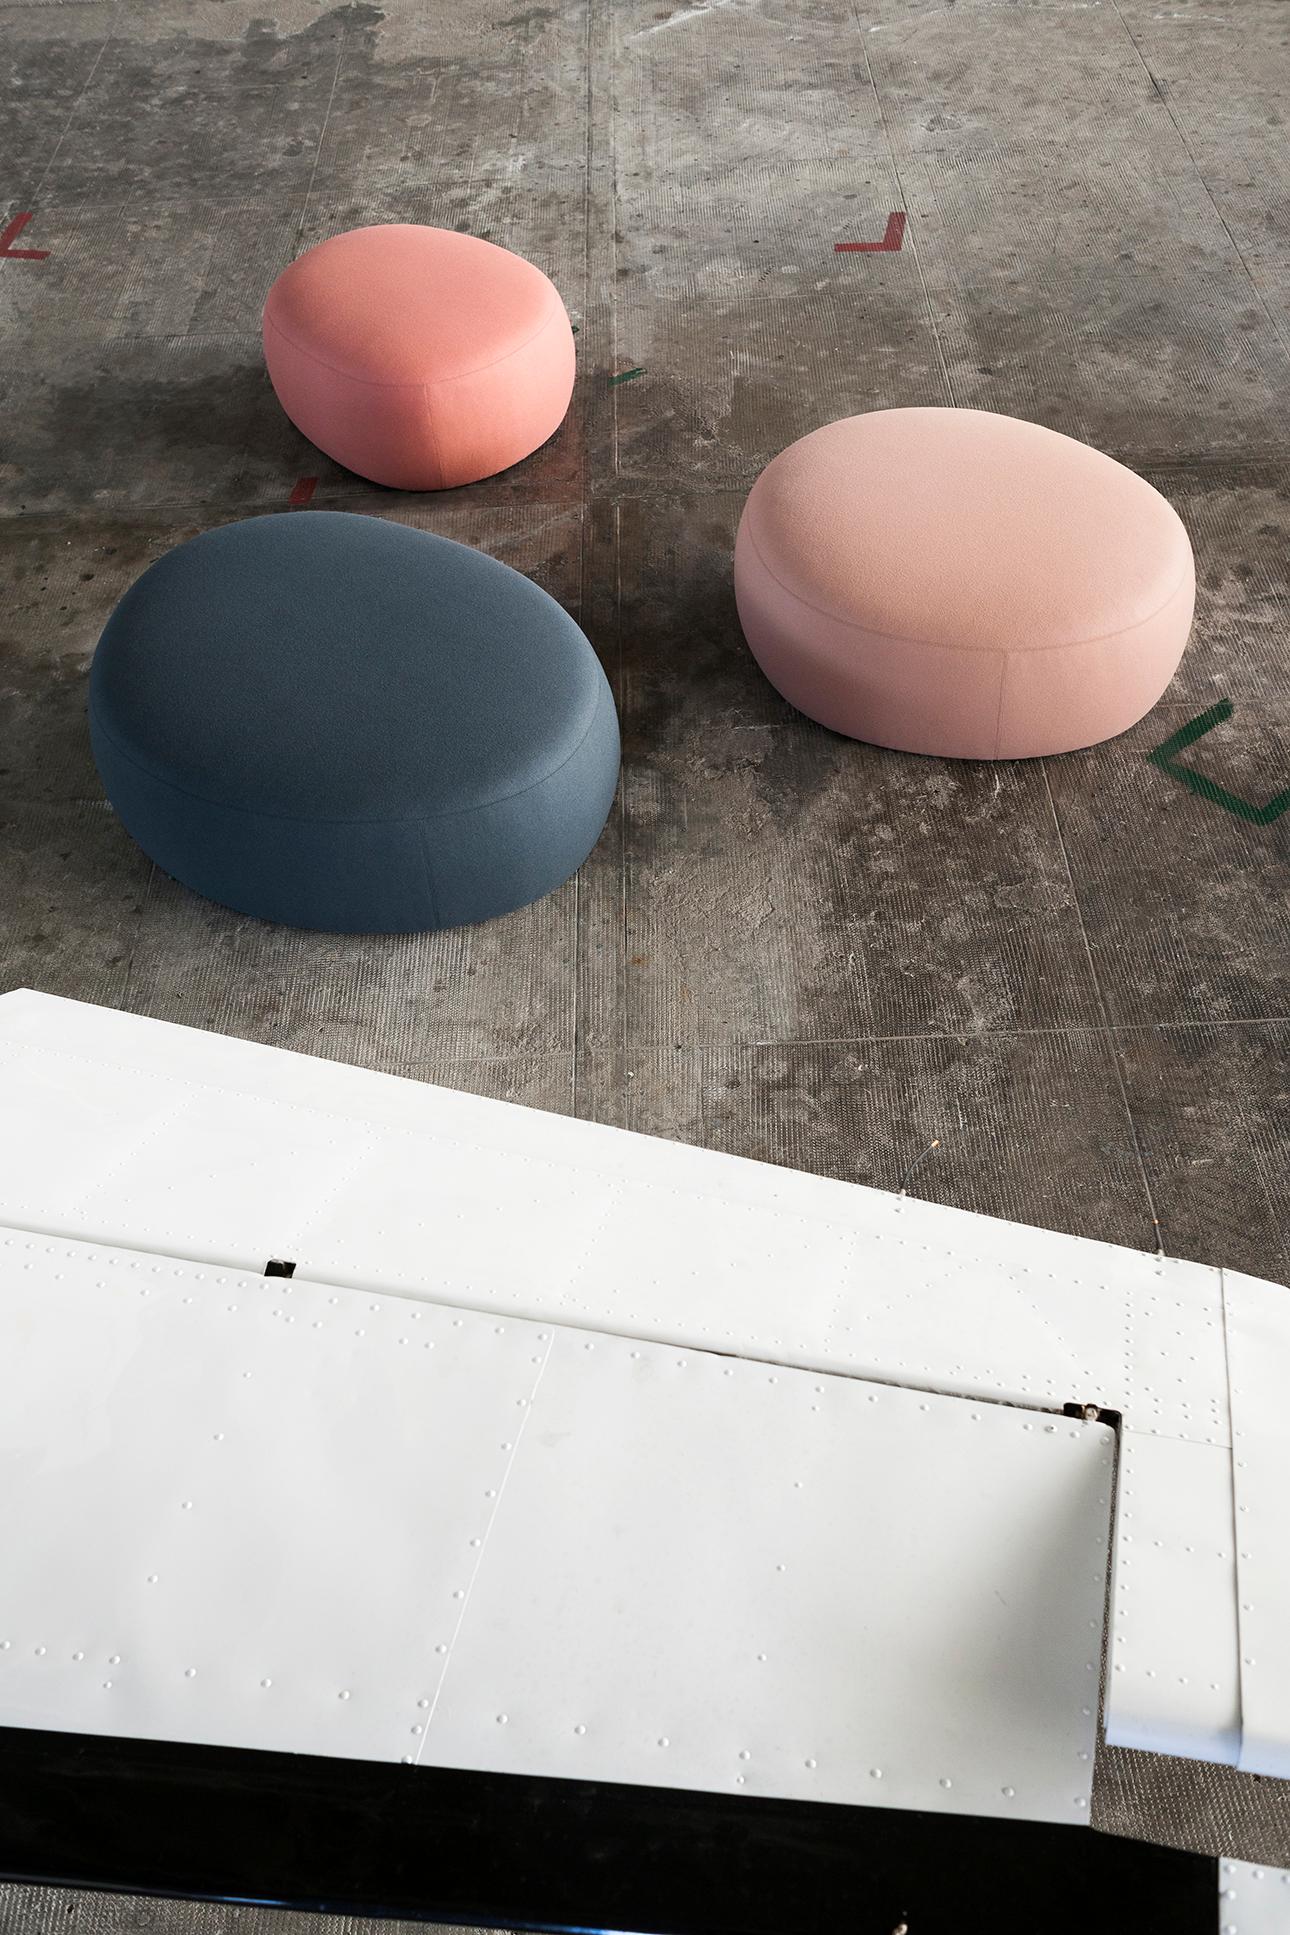 Tacchini Small Matera Ottoman in thuya fabric by Gordon Guillaumier. Explore new creative scenarios in an imaginary tour of the extraordinary urban ecosystem – the Sassi di Matera. Here, the stratification of eras displays the continuity of past and